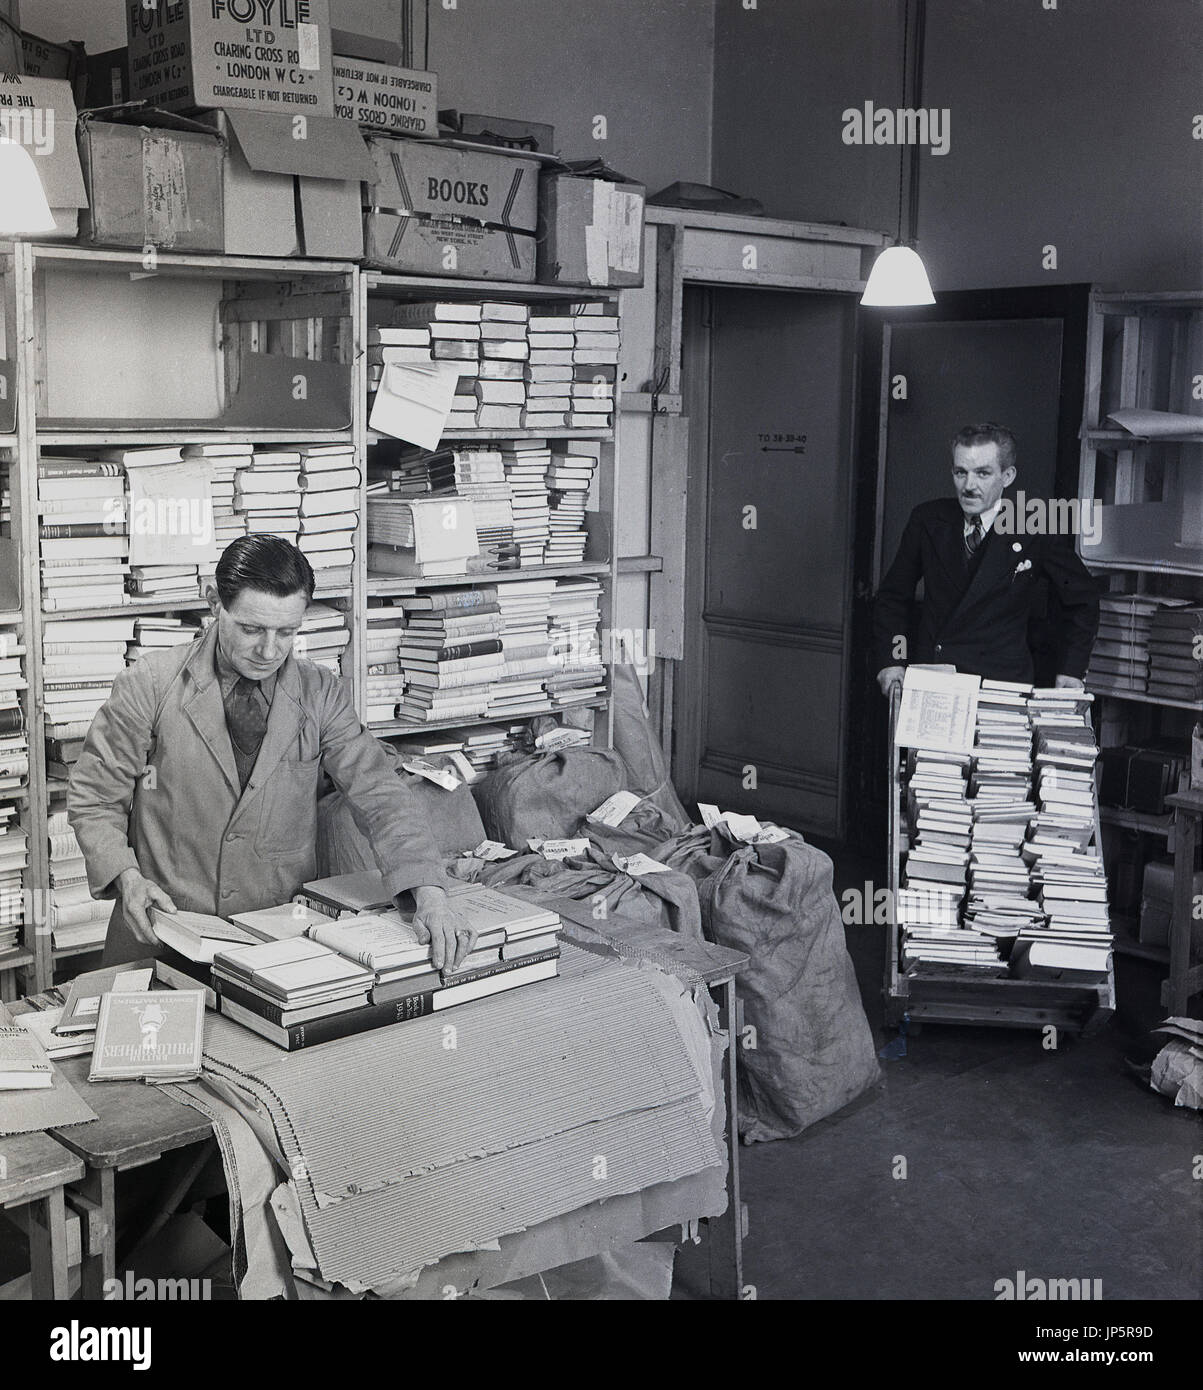 1950s, picture shows a coated employee with tie packing books up ready for despatch in a store room at the famous bookshop of W & G Foyle Ltd, Charing Cross Rd, London, while another suited employee brings more books in on a trolley. Stock Photo